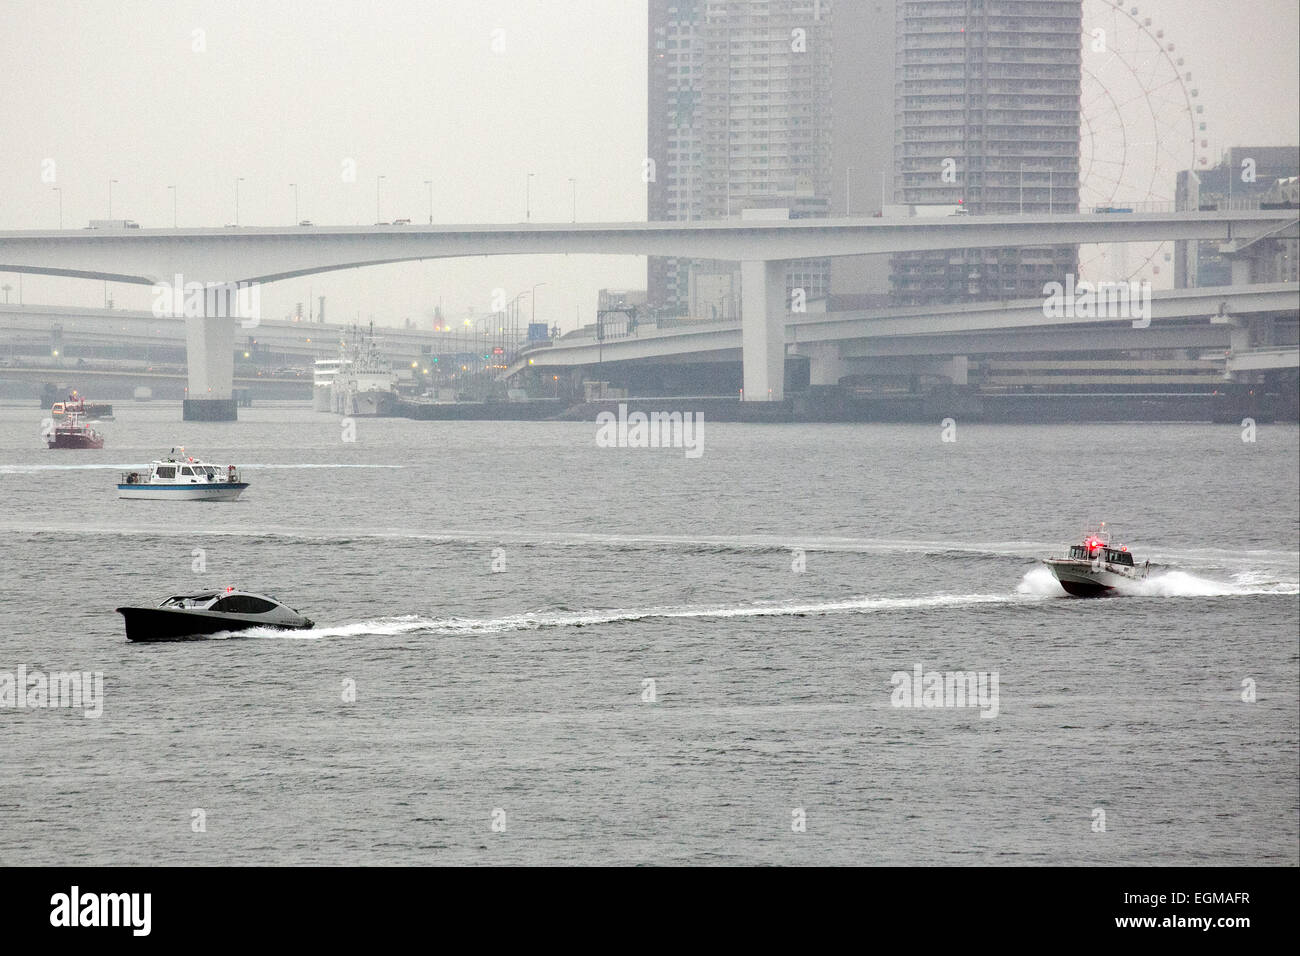 The Duke of Cambridge arrives in Tokyo by boat on February 26th, 2015. The Prince flew in to Tokyo International Airport on Thursday afternoon and then traveled to Tokyo city on a cruise boat to visit the historic Hama Rikyu gardens and a traditional Japanese tea house. He arrived on a rainy day but nevertheless Japanese TV crews were out to try to catch a glimpse of the Prince as his boat entered Tokyo Harbour and passed under the Rainbow Bridge. On his visit he will launch an Innovation is Great campaign and also travel to Ishinomaki in Miyagi Prefecture to meet people who were affected by t Stock Photo